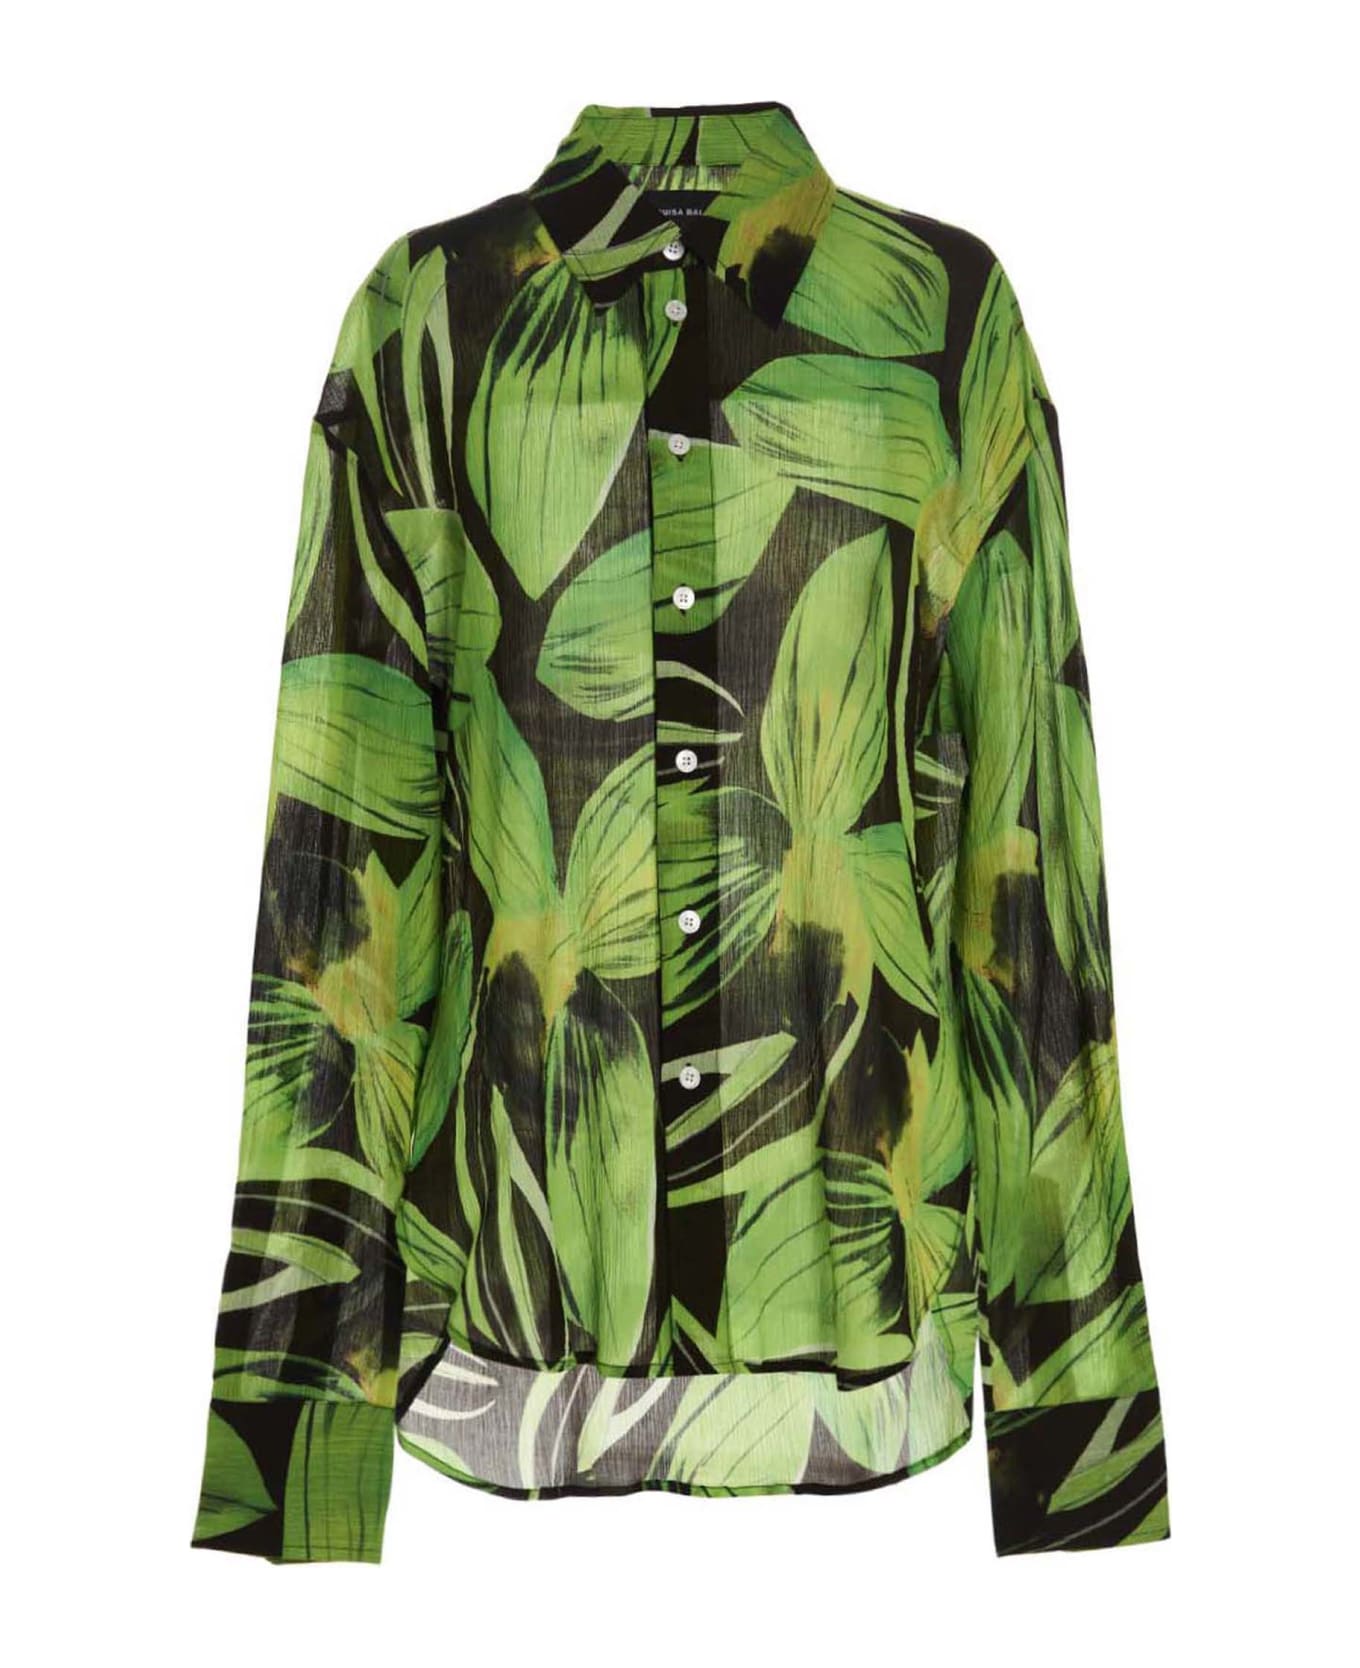 Louisa Ballou Oversize Shirt With A Print. - Multicolor ブラウス